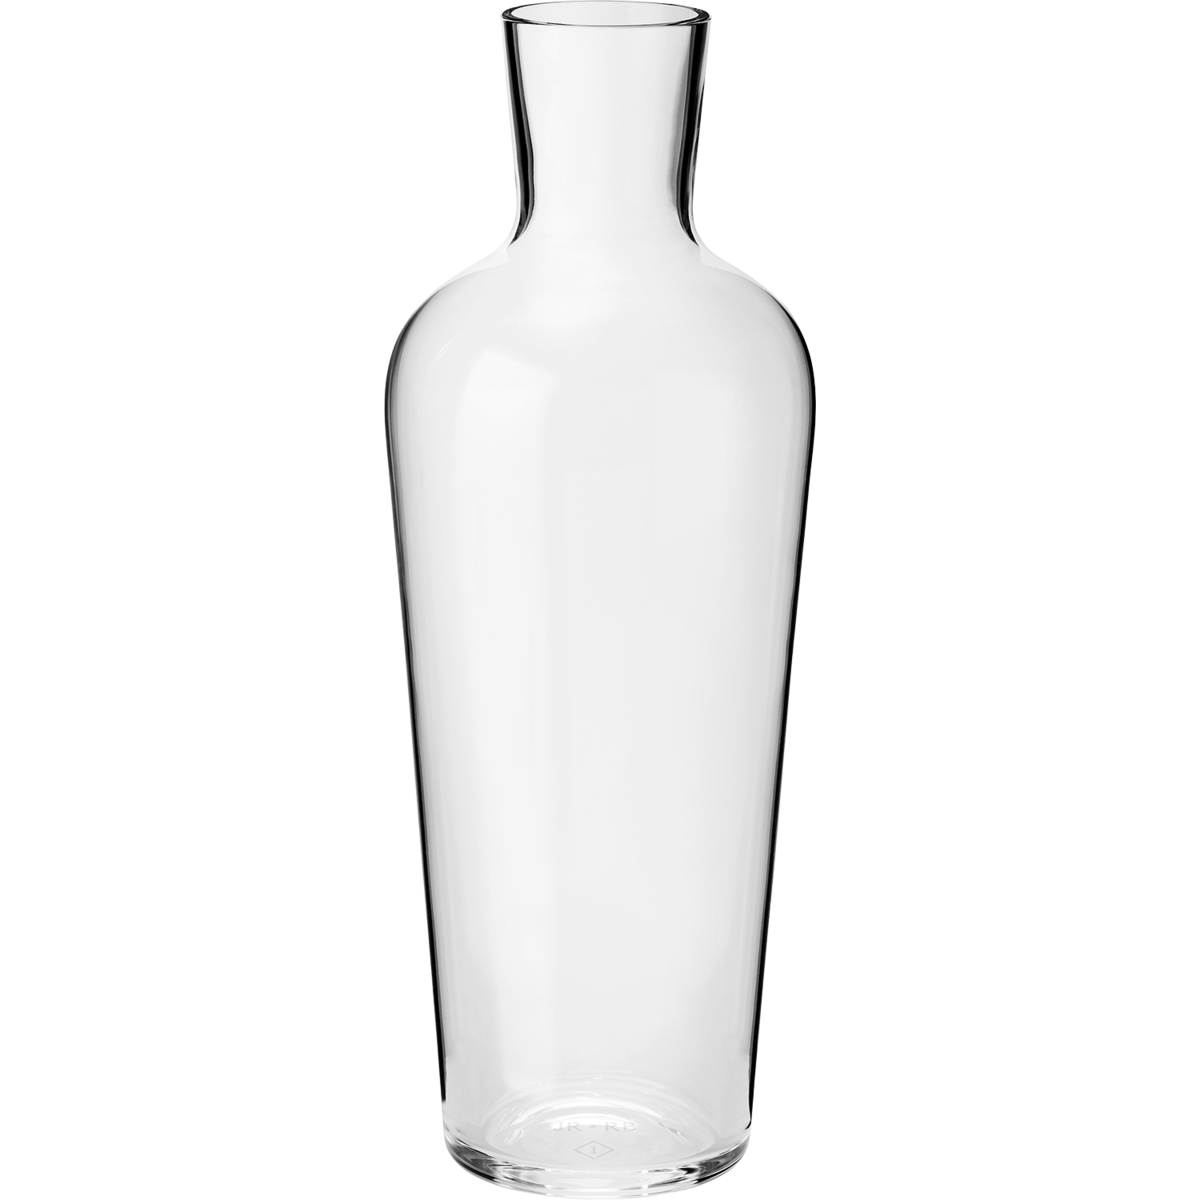 The Jancis Robinson Water carafe